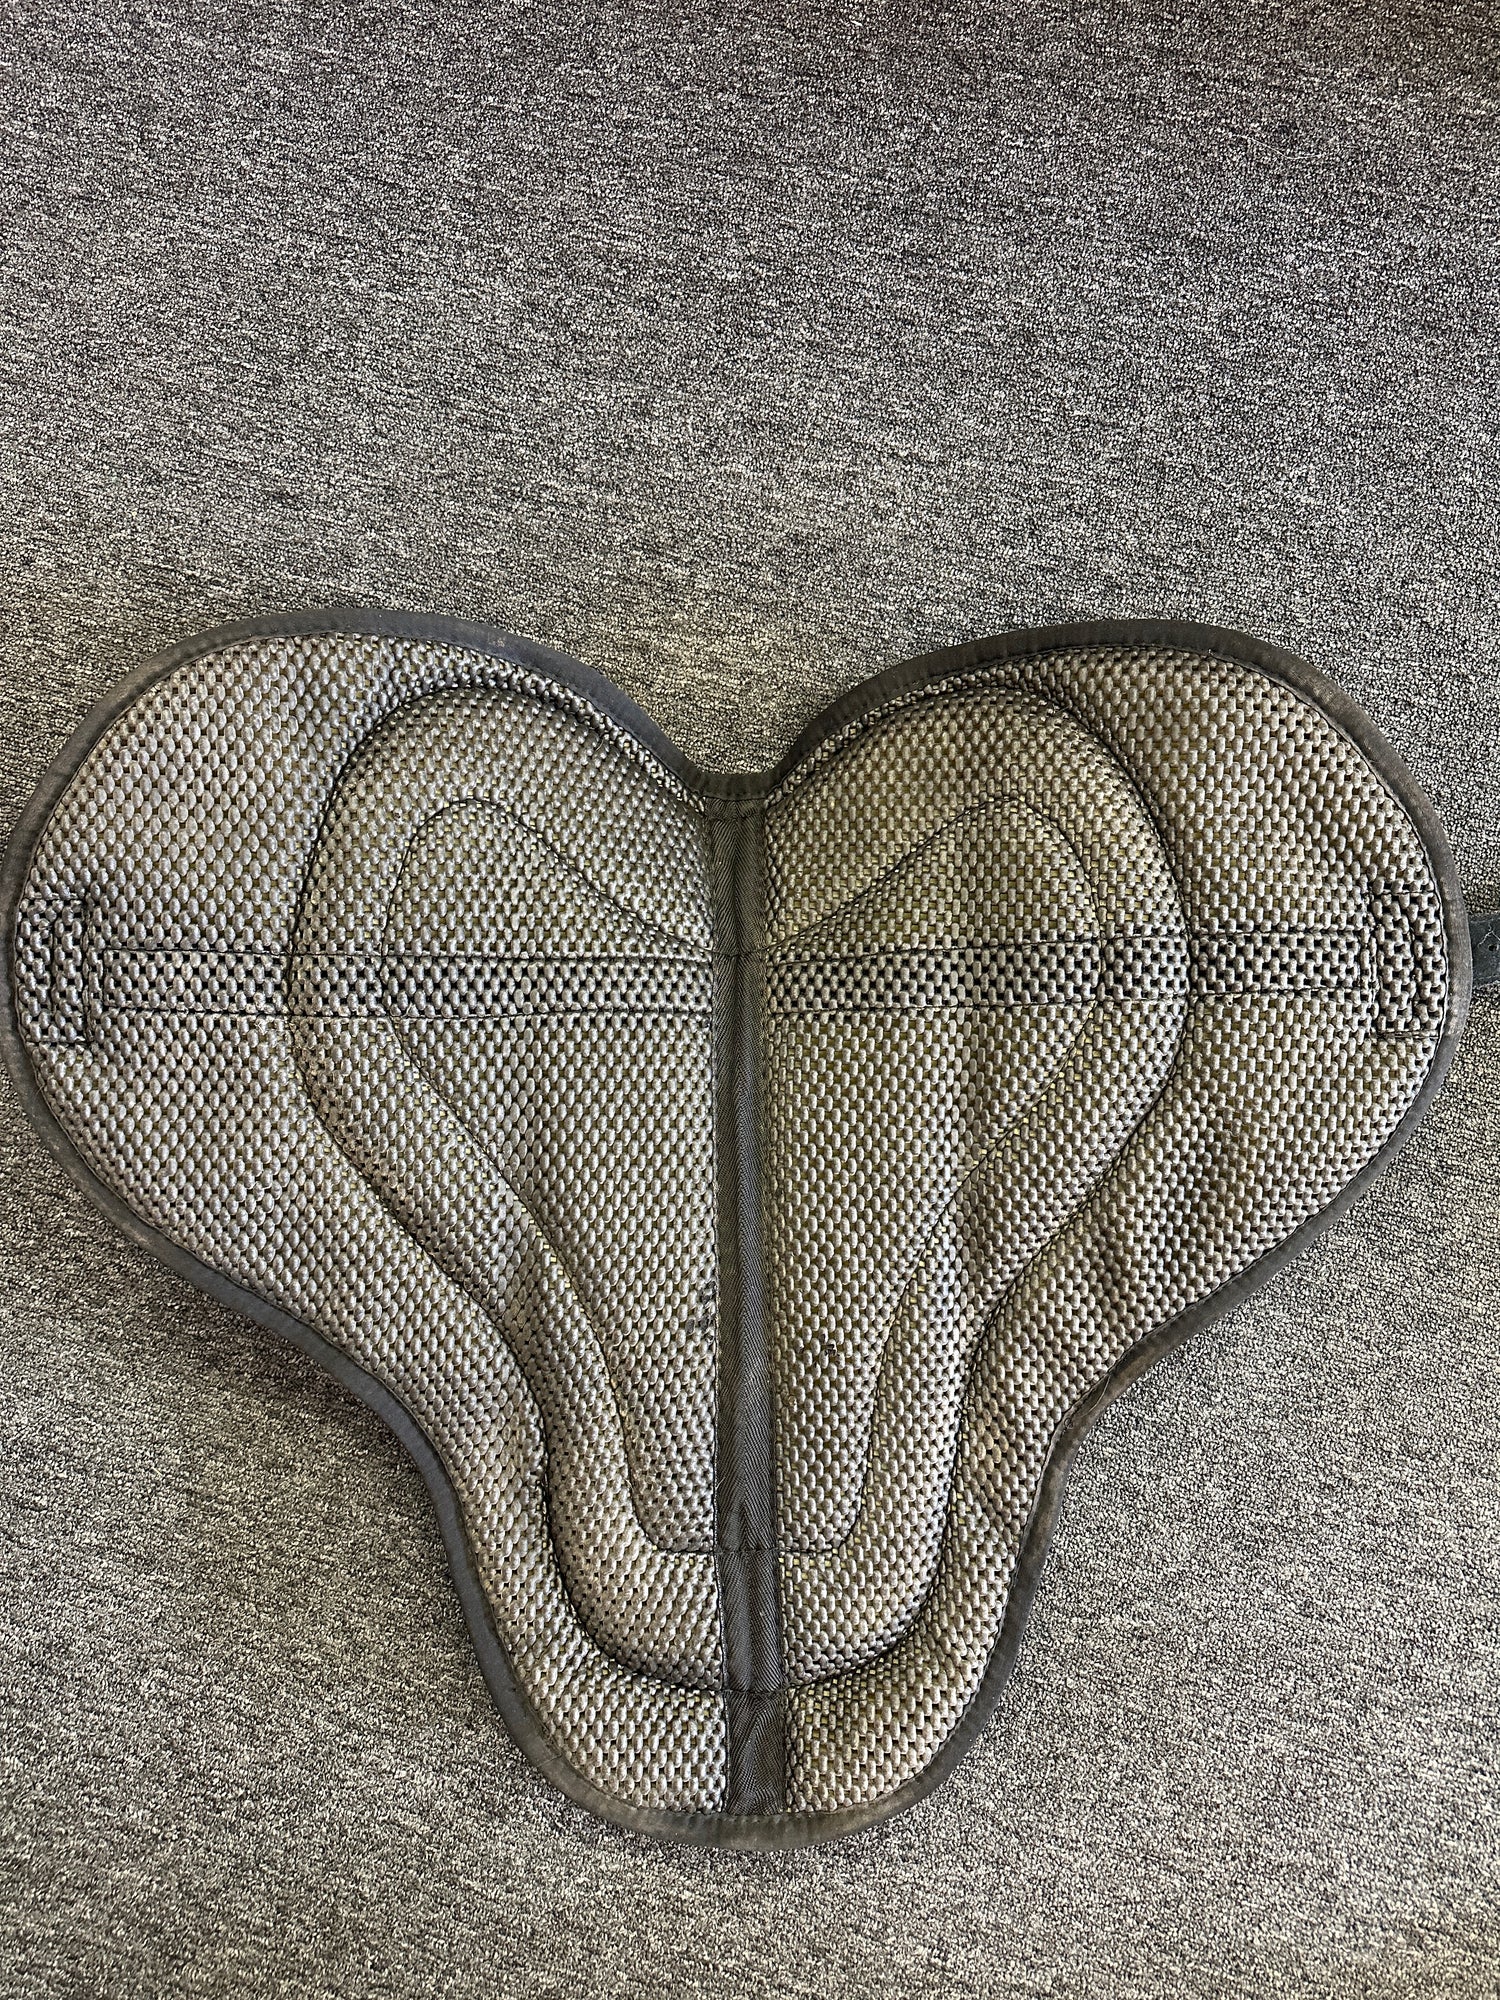 Bare Back Pad, Gently used with 24" inch Girth  - Thinline